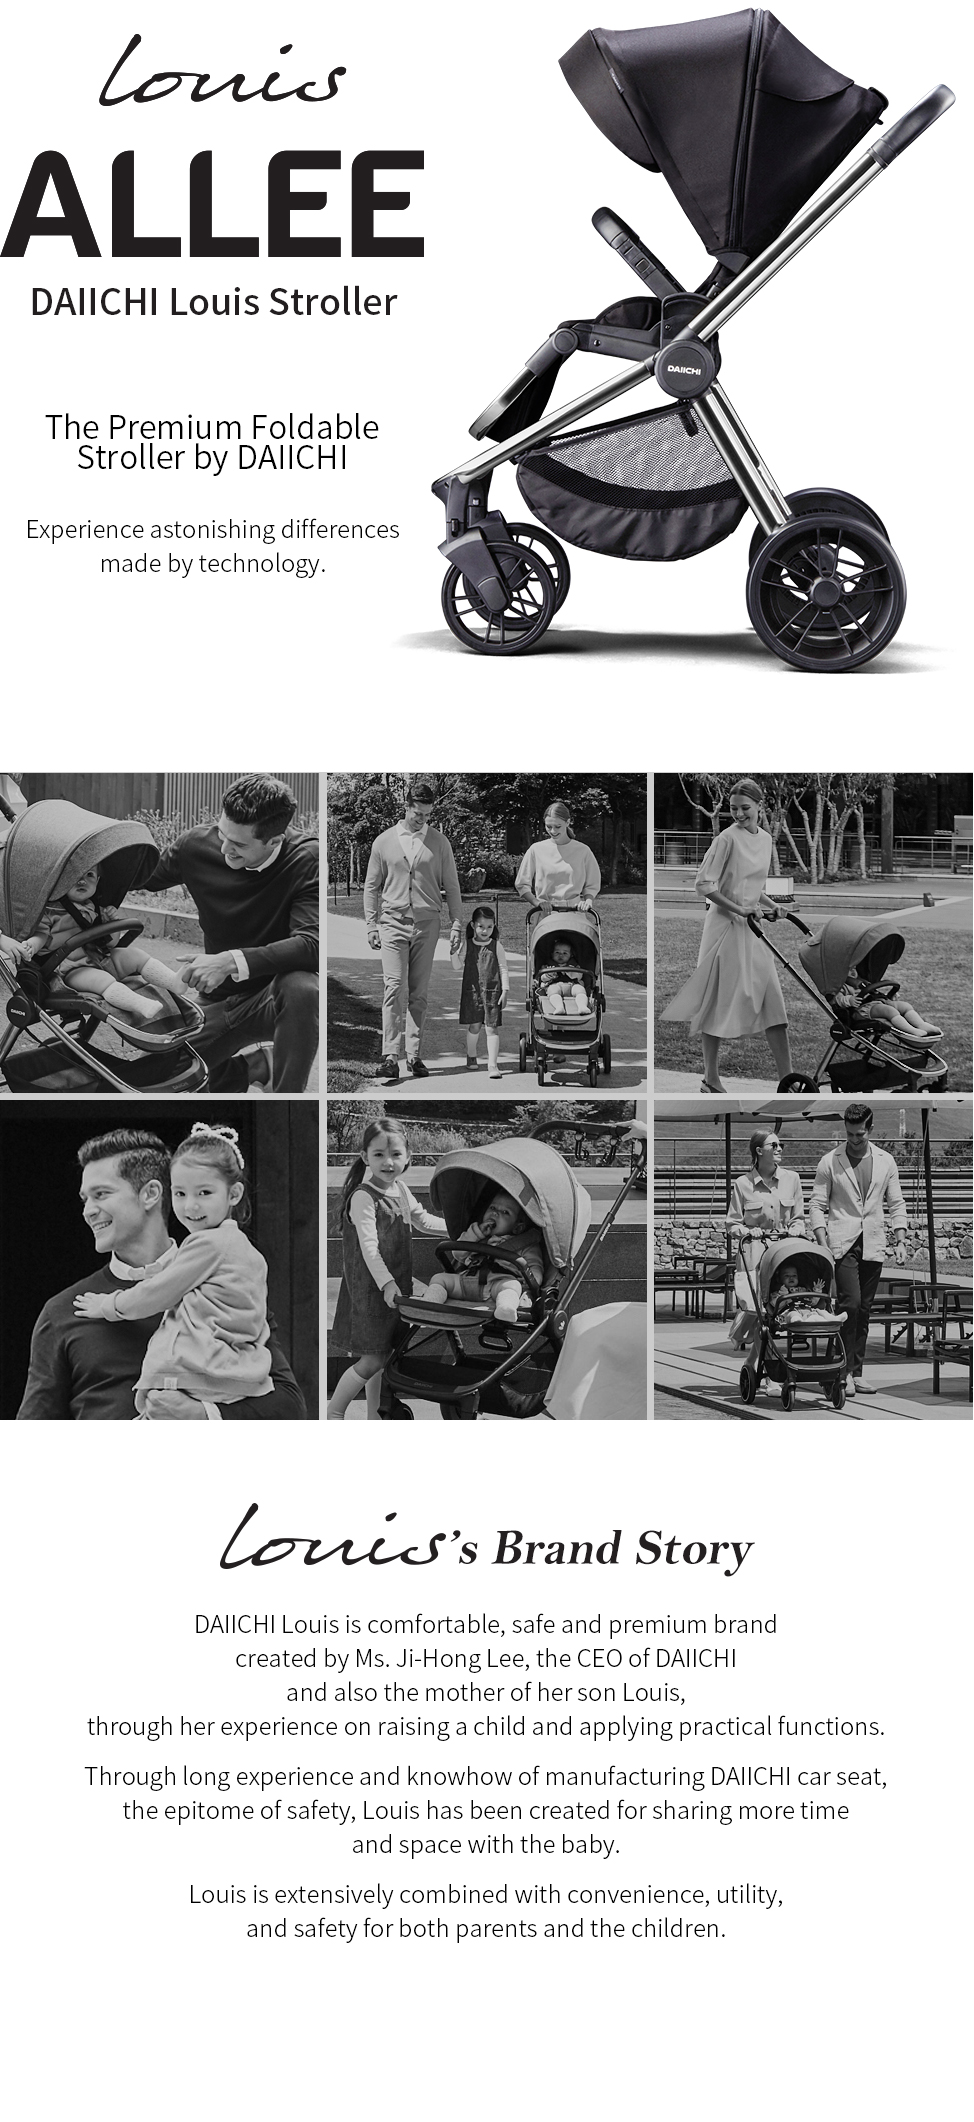 The premium foldable stroller by DAIICHI. DAIICHI Louis is comfortable, safe and premium brand created by Ms. Ji-Hong Lee, the CEO of DAIICHI and also the mother of her son Louis, through her experience on raising a child and applying practical functions.